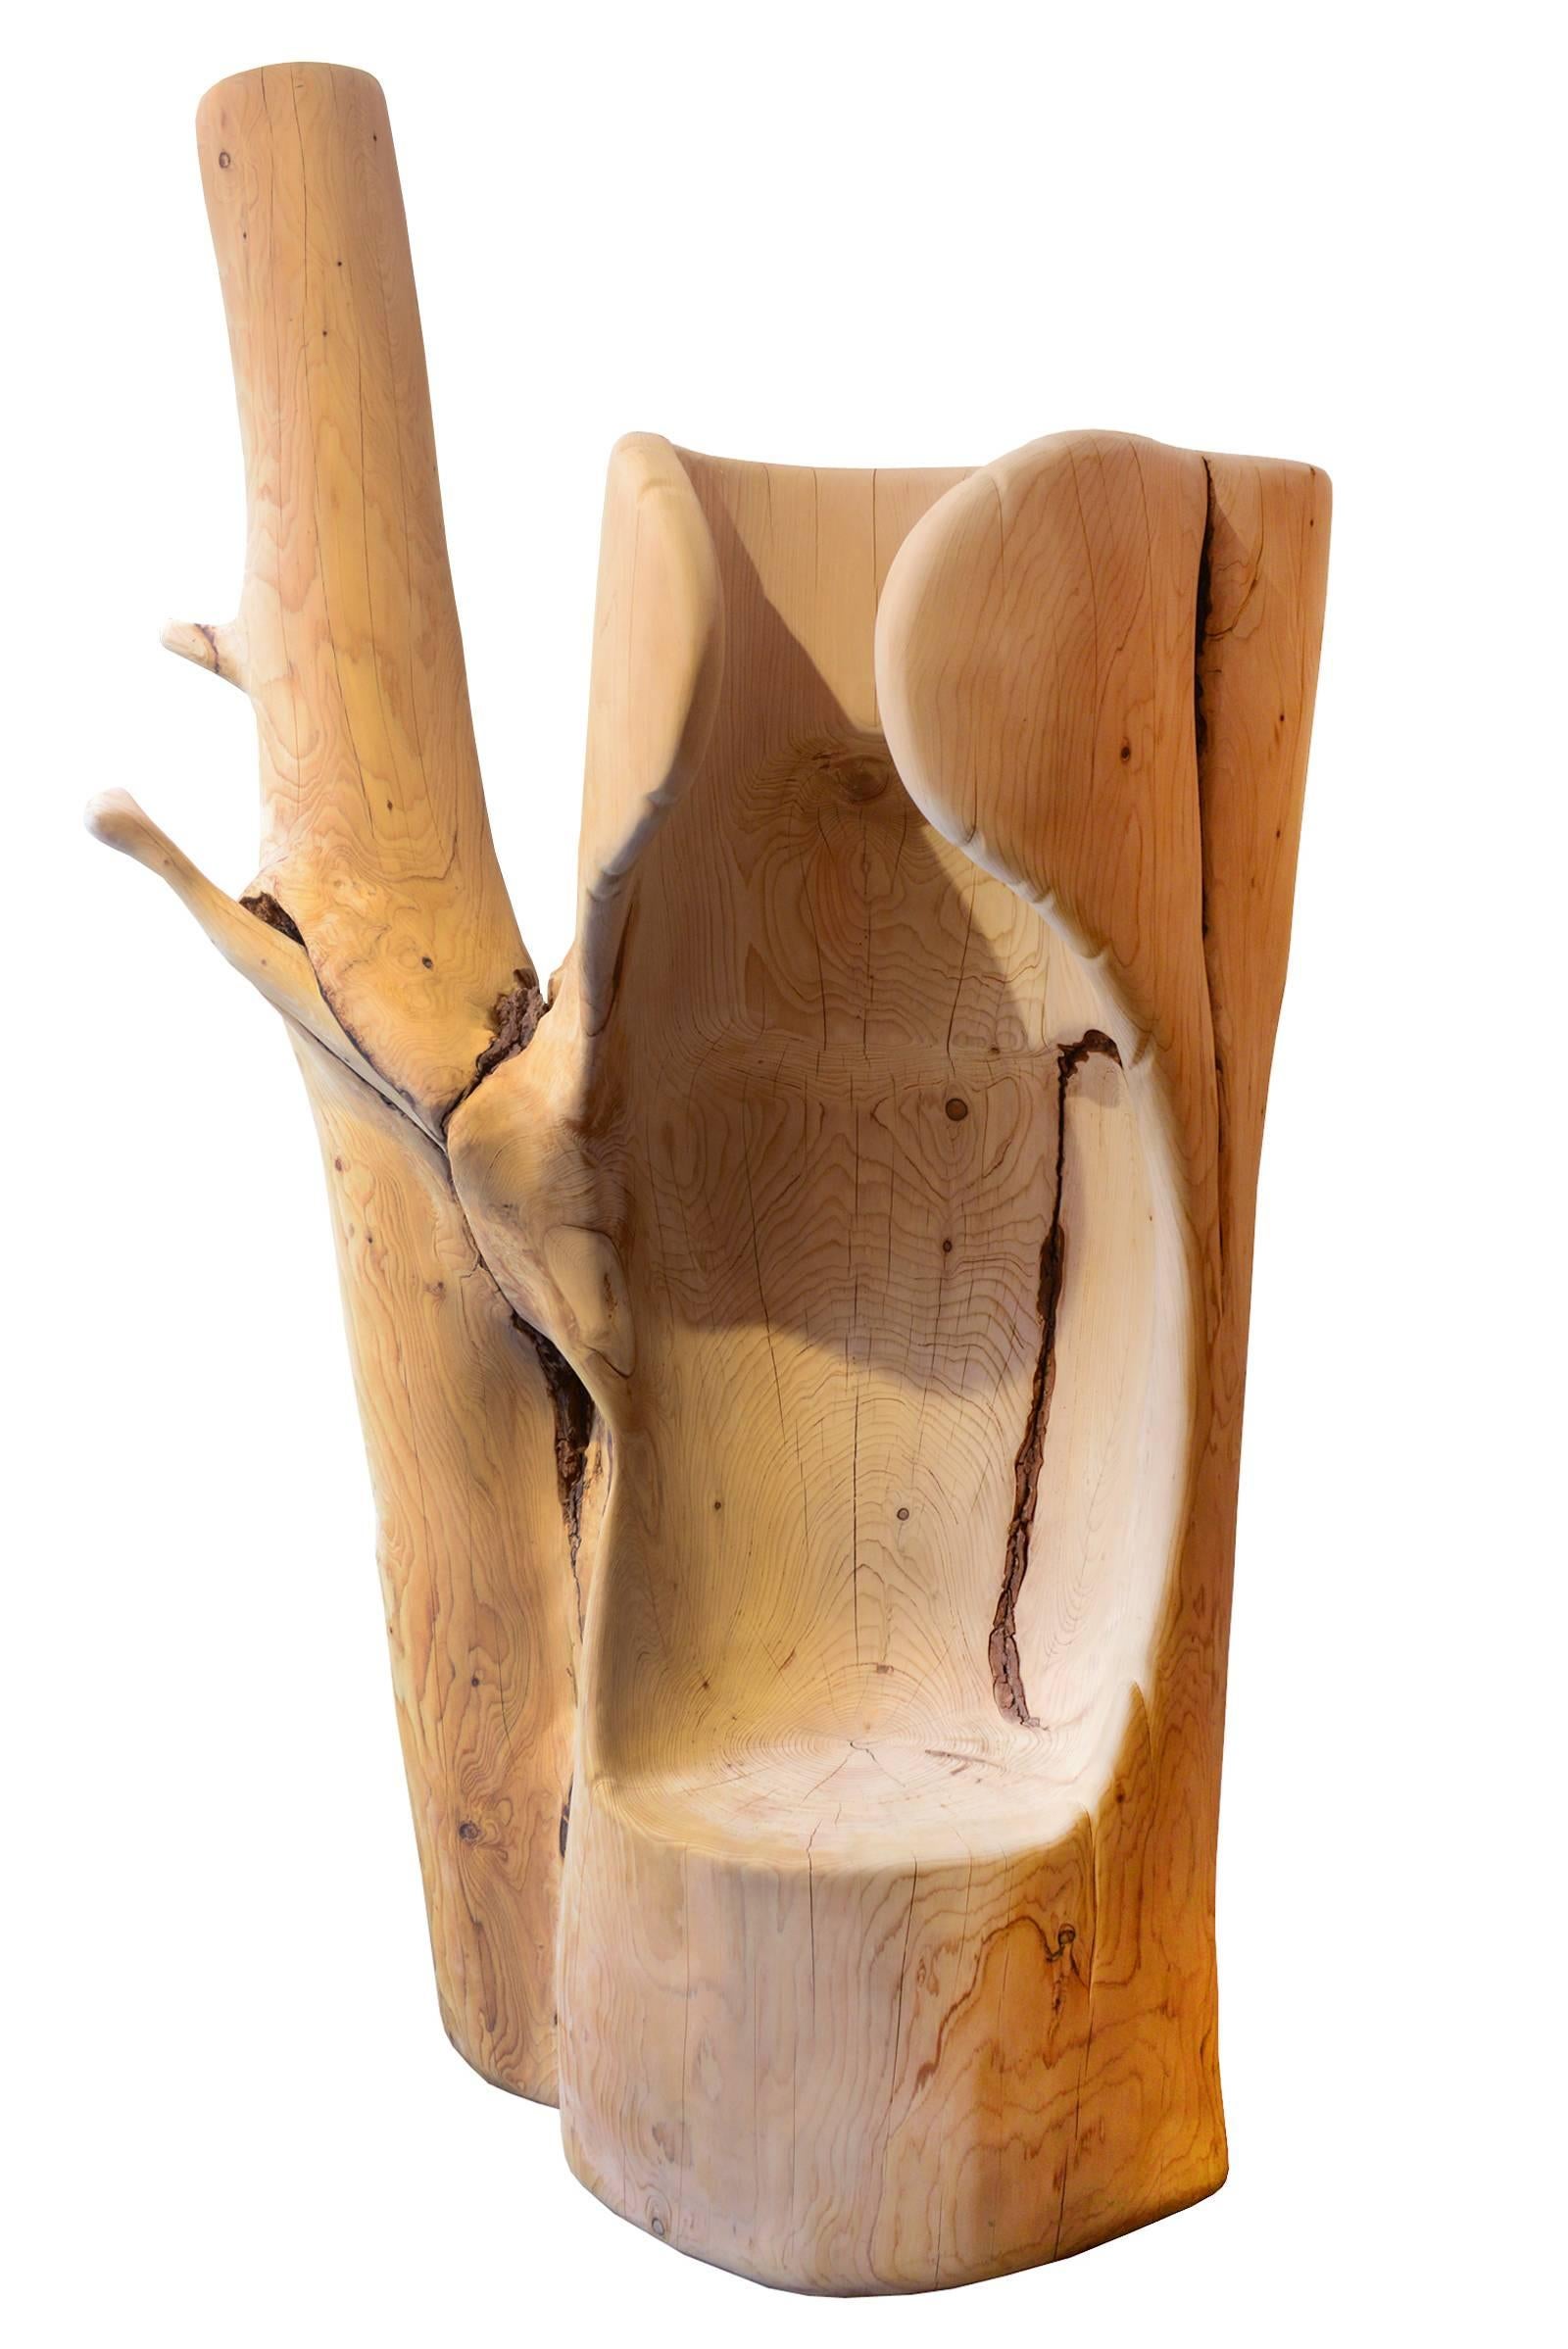 Trone cedar Tree B totally hand-carved with
lebanese solid cedar tree. Made from dead 
cedar tree. With coral red cushion seat included.
Made in France in 2018.
Also available in Trone Cedar Tree A.
Exceptional and unique piece. 
 